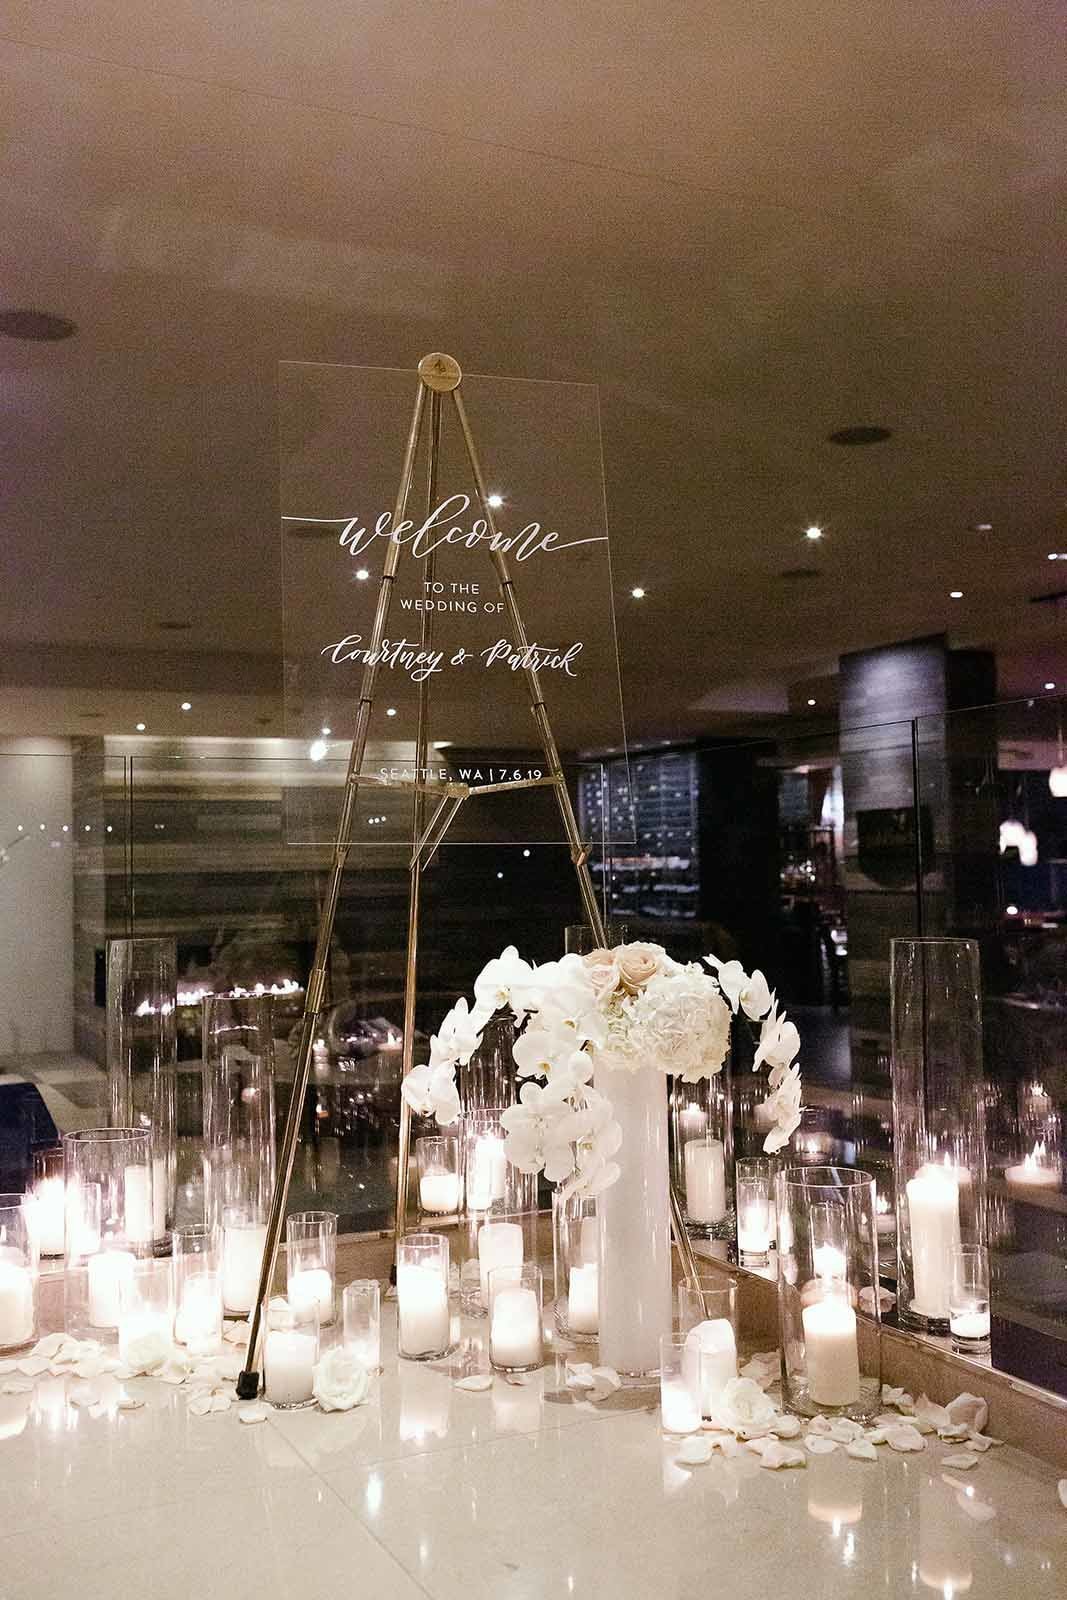 elegant welcome sign in clear lucite on gold stand, with orchid arrangements and candles at base